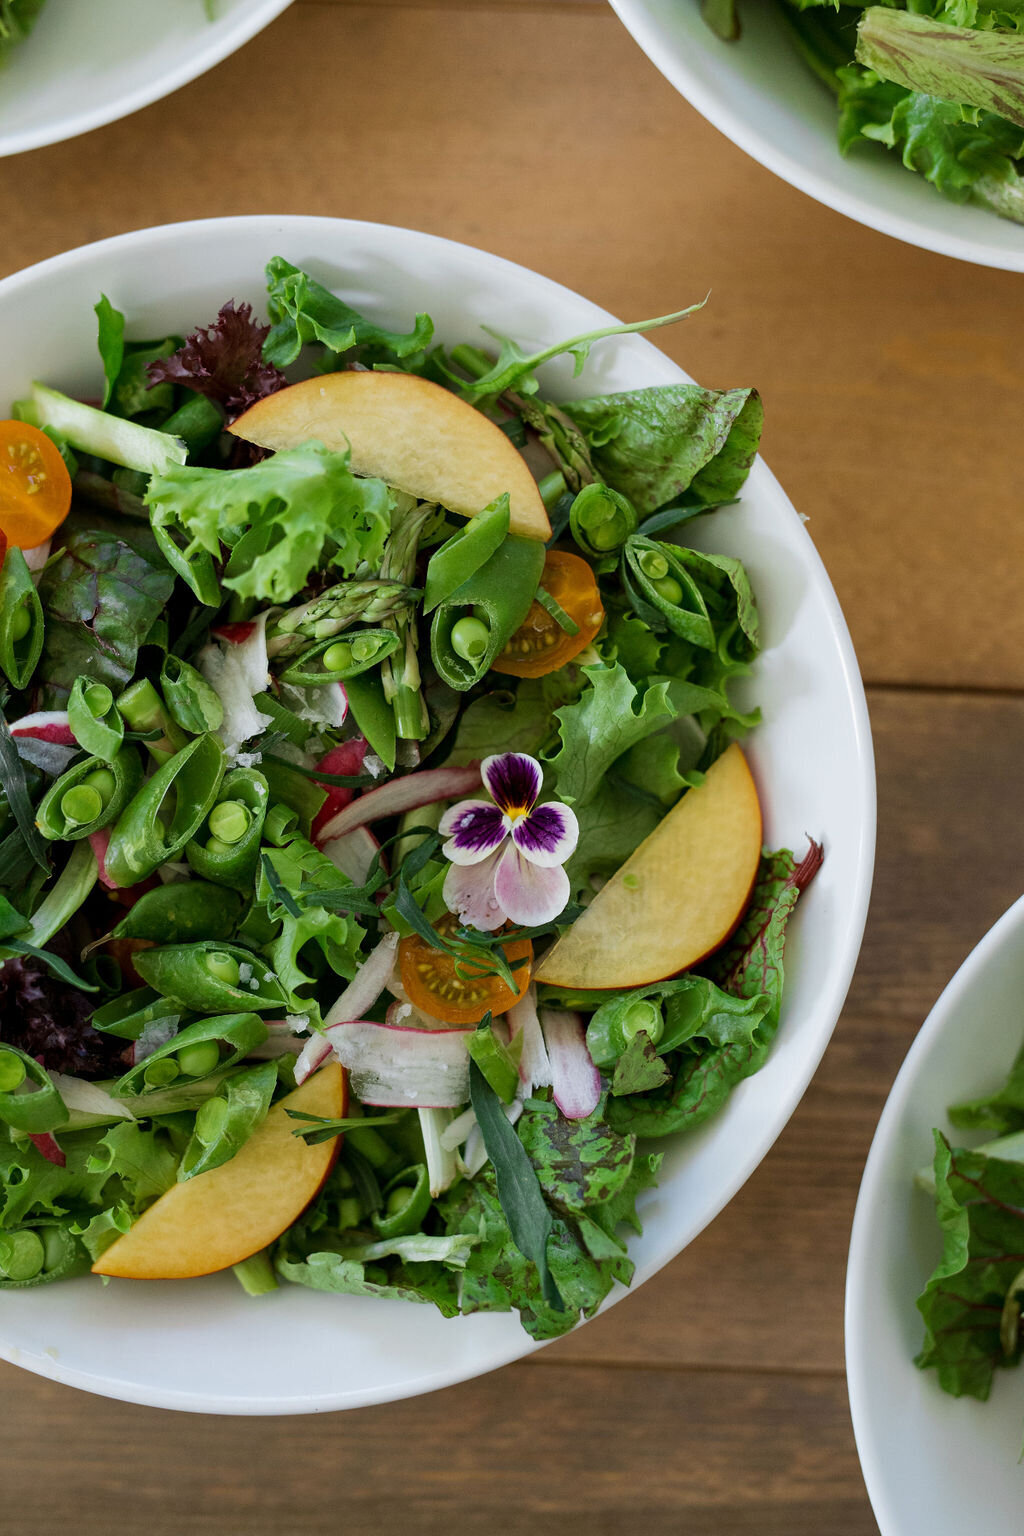 green salad with nectarines, flowers and peas